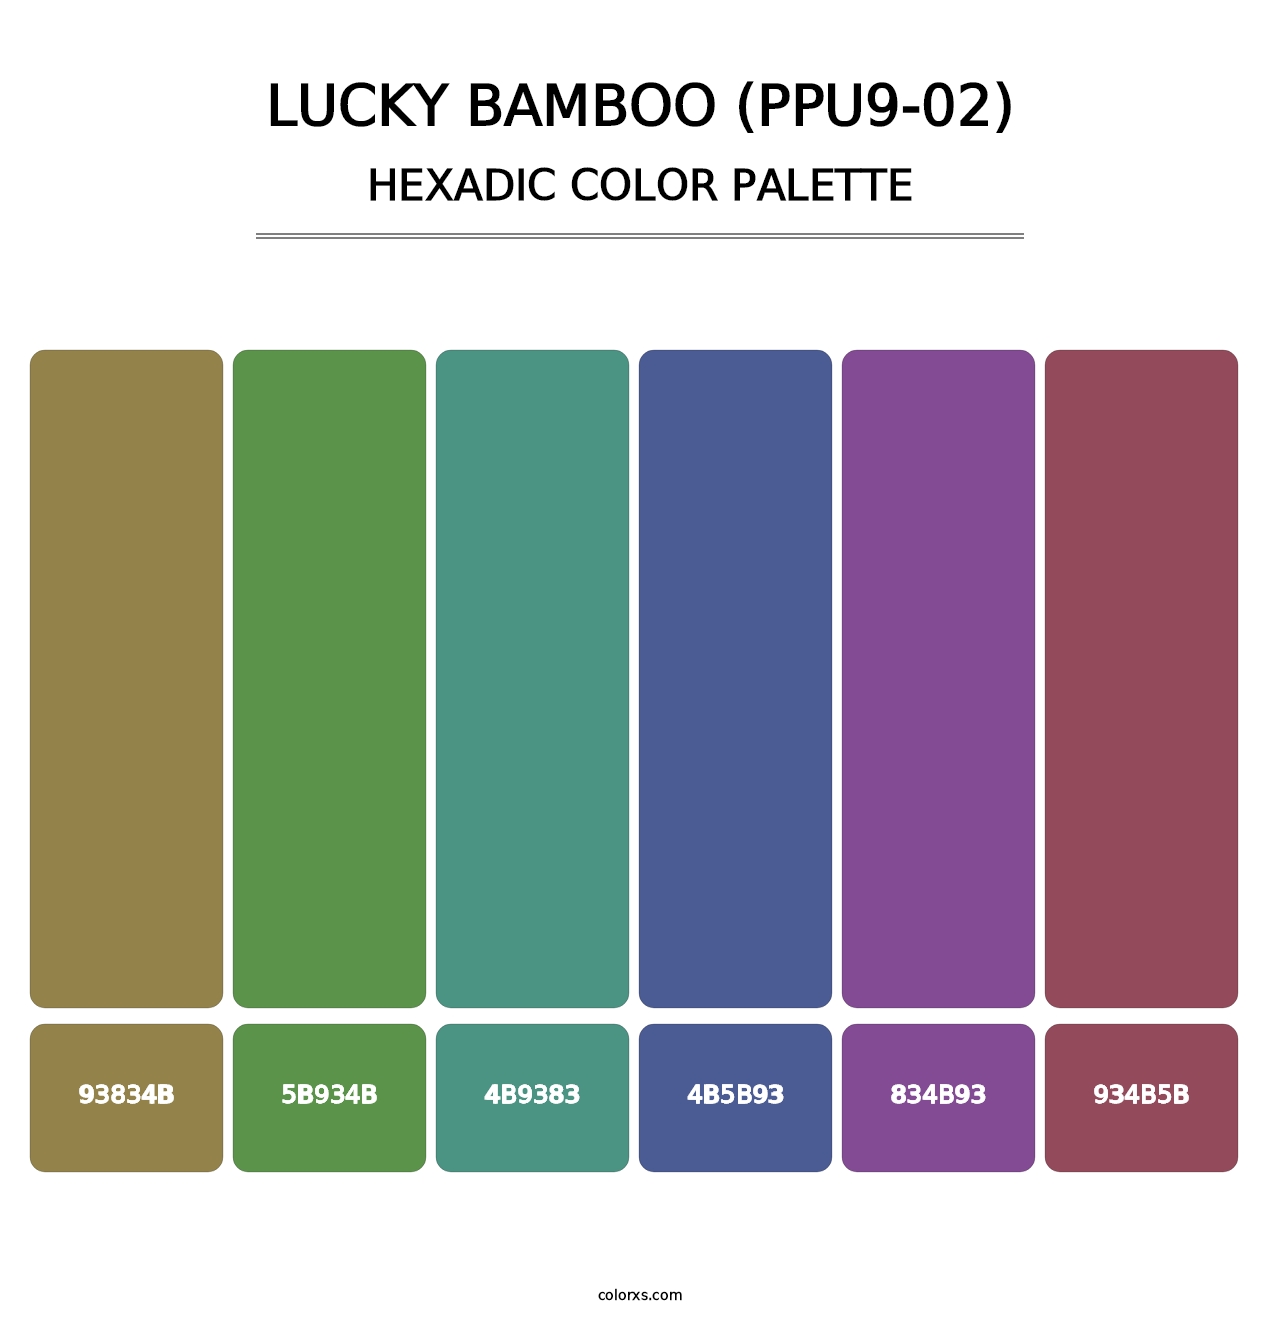 Lucky Bamboo (PPU9-02) - Hexadic Color Palette